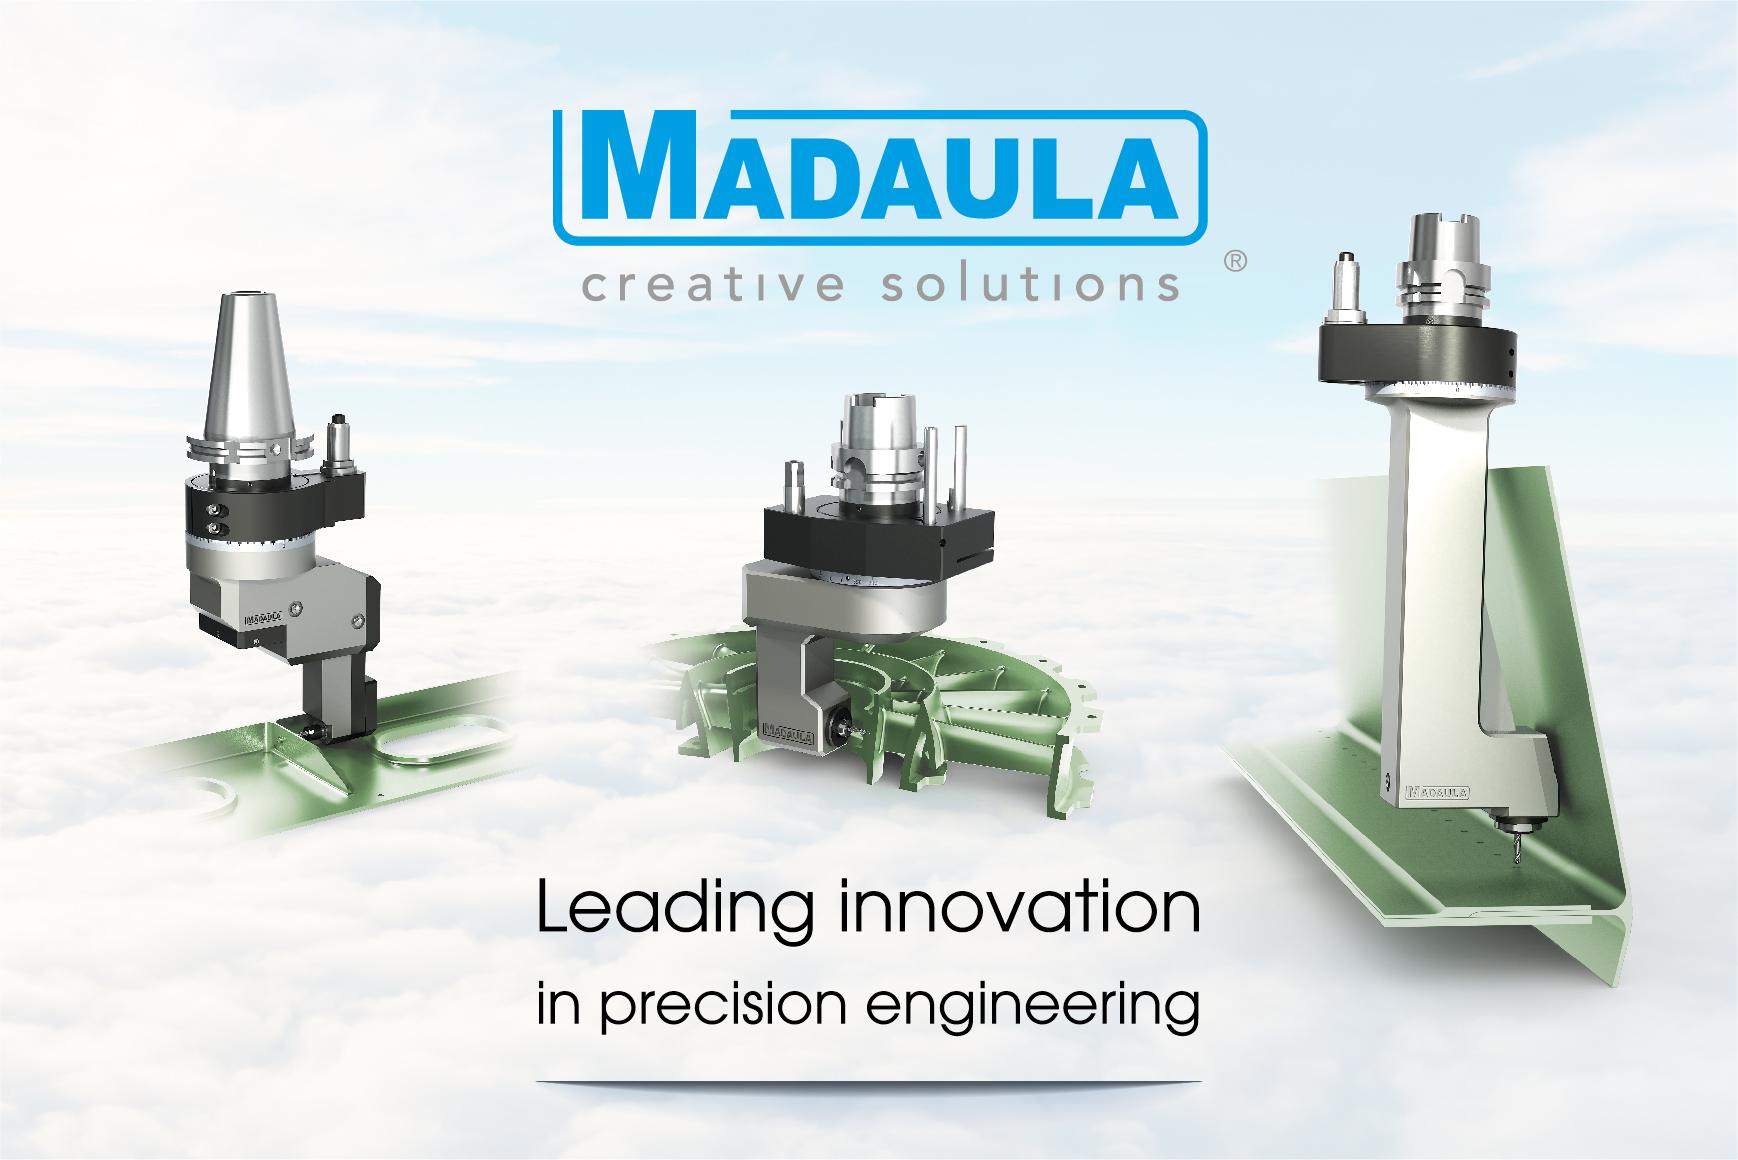 Madaula develops a new category of products for aerospace sector